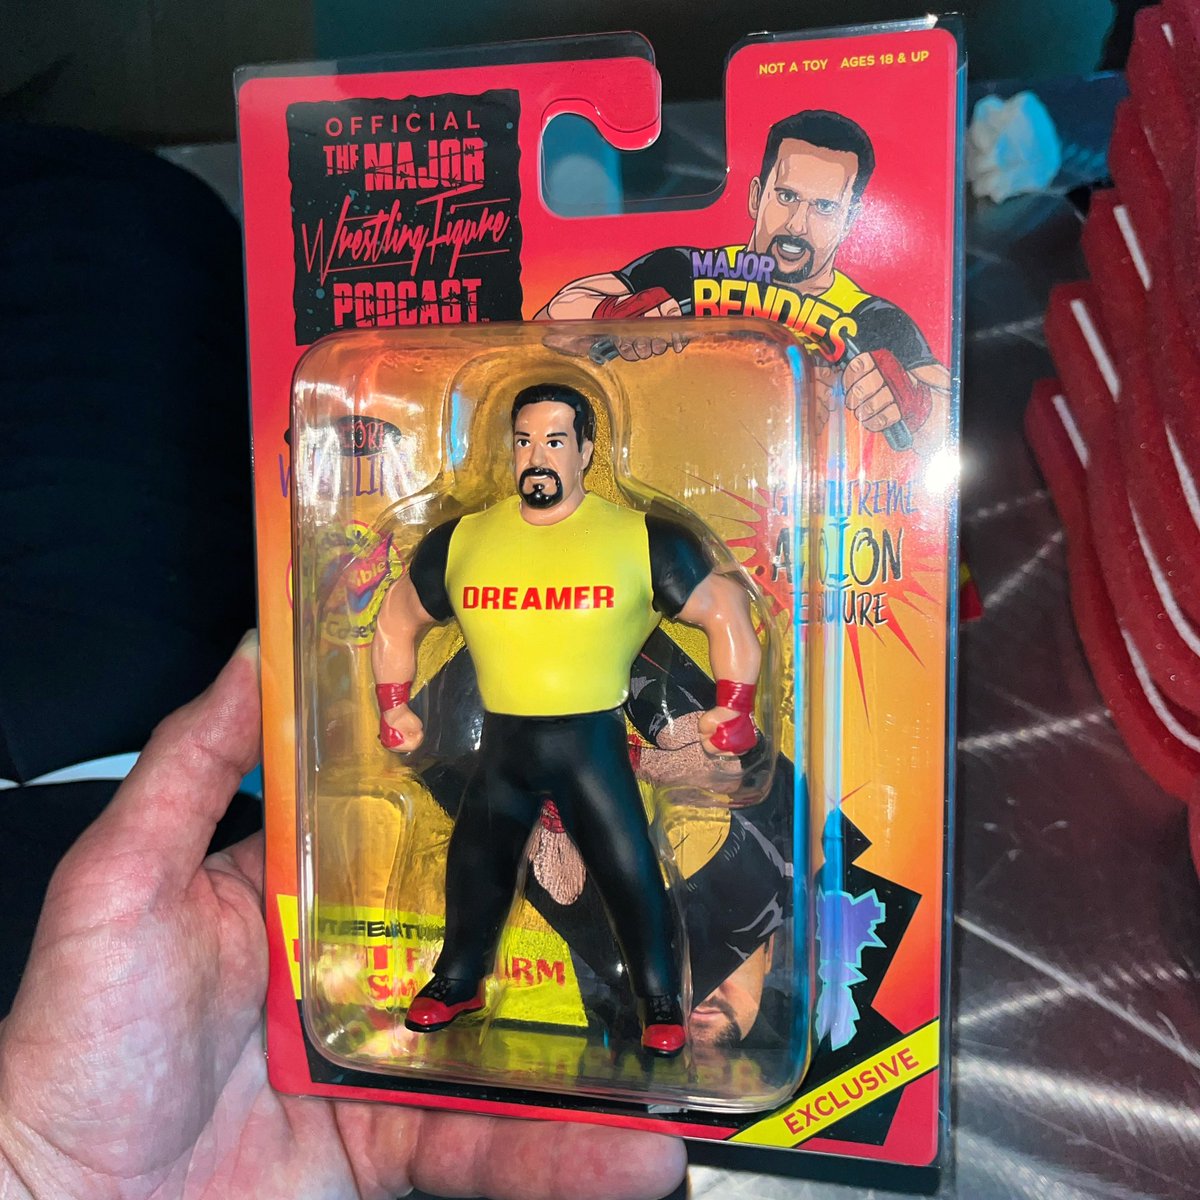 @majorwfpod LIVE 19 Tommy Dreamer @majorbendies paying homage to the yellow shirt ECW osftm figure

#figheel #actionfigures #toycommunity #toycollector #wrestlingfigures #wwe #aew #njpw #tna